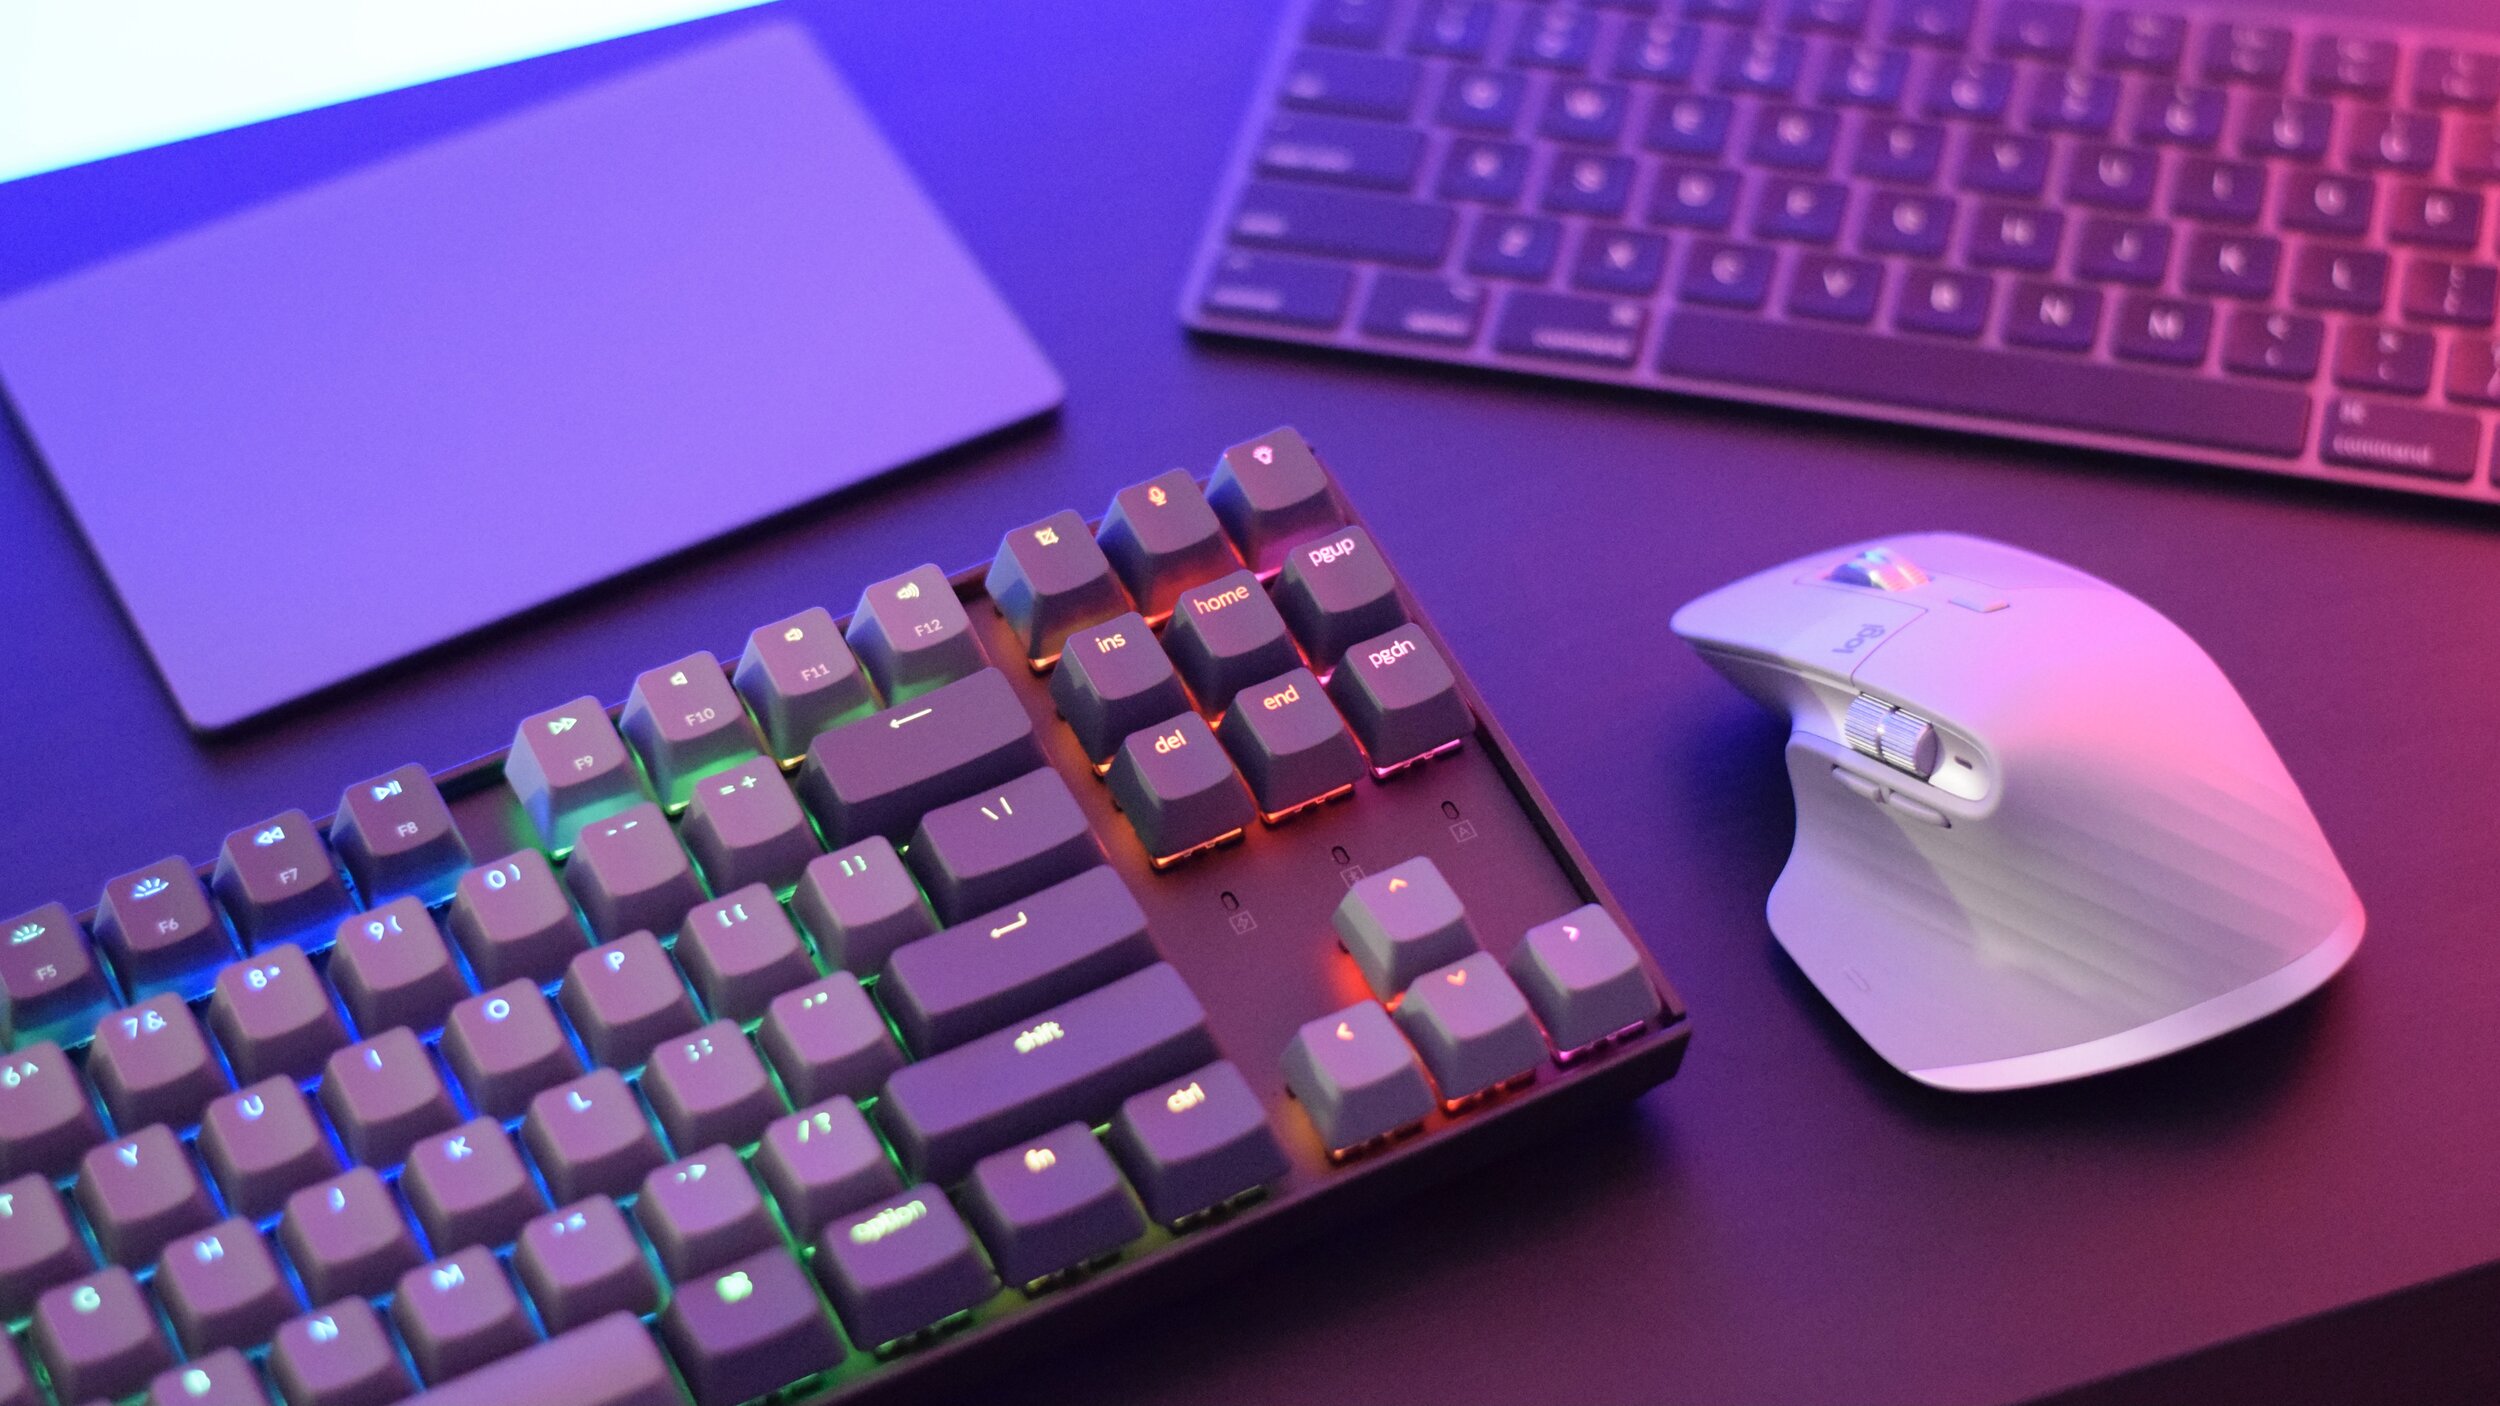 Logitech MX Master 3 and MX Key Review: The Perfect Mouse and Keyboard?